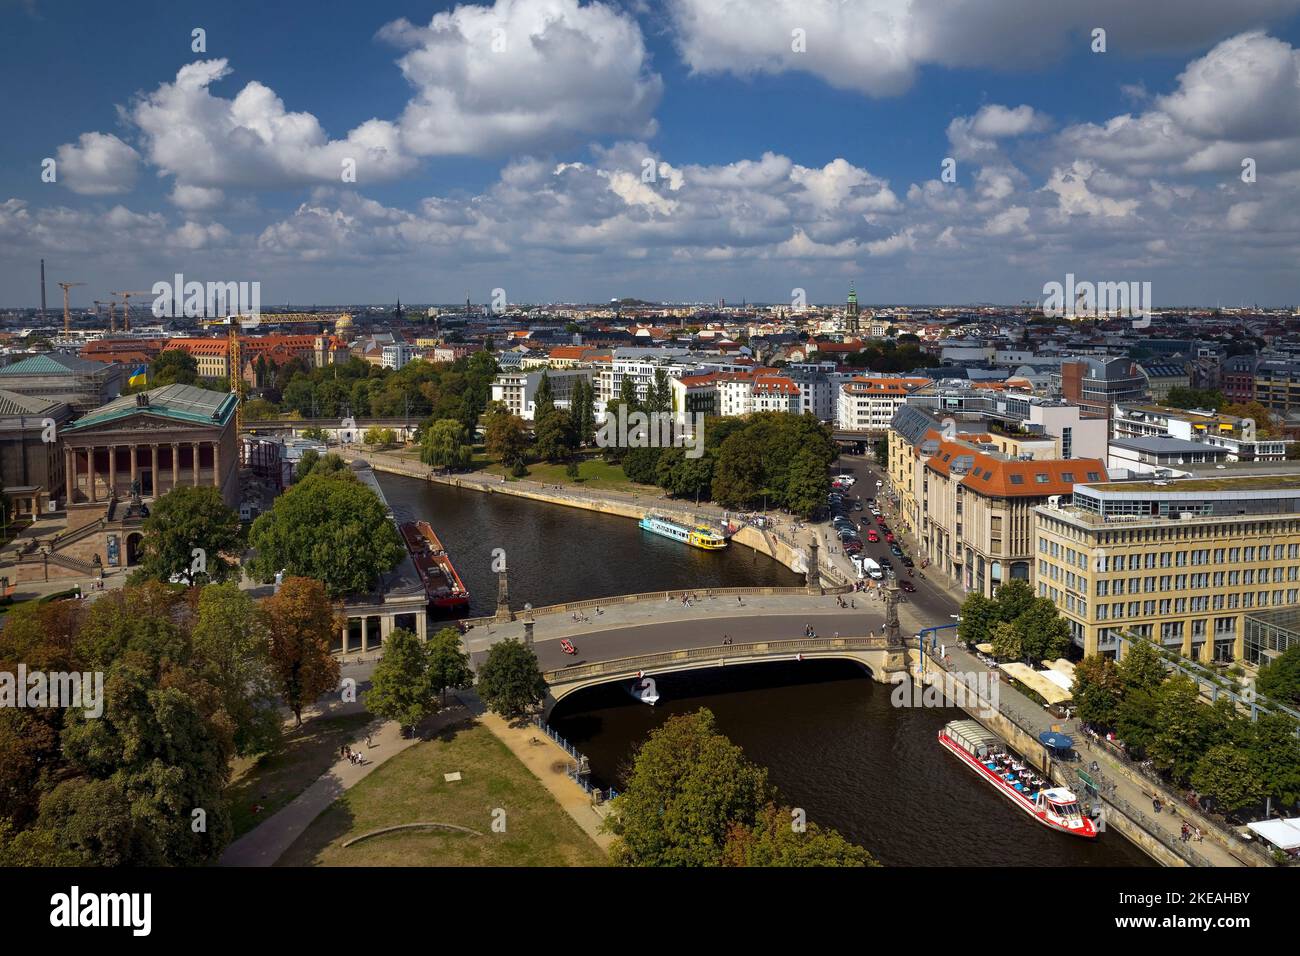 raised view from the Berlin Cathedral of river Spree with Friedrichs Bridge and Alte Nationalgalerie, Germany, Berlin Stock Photo